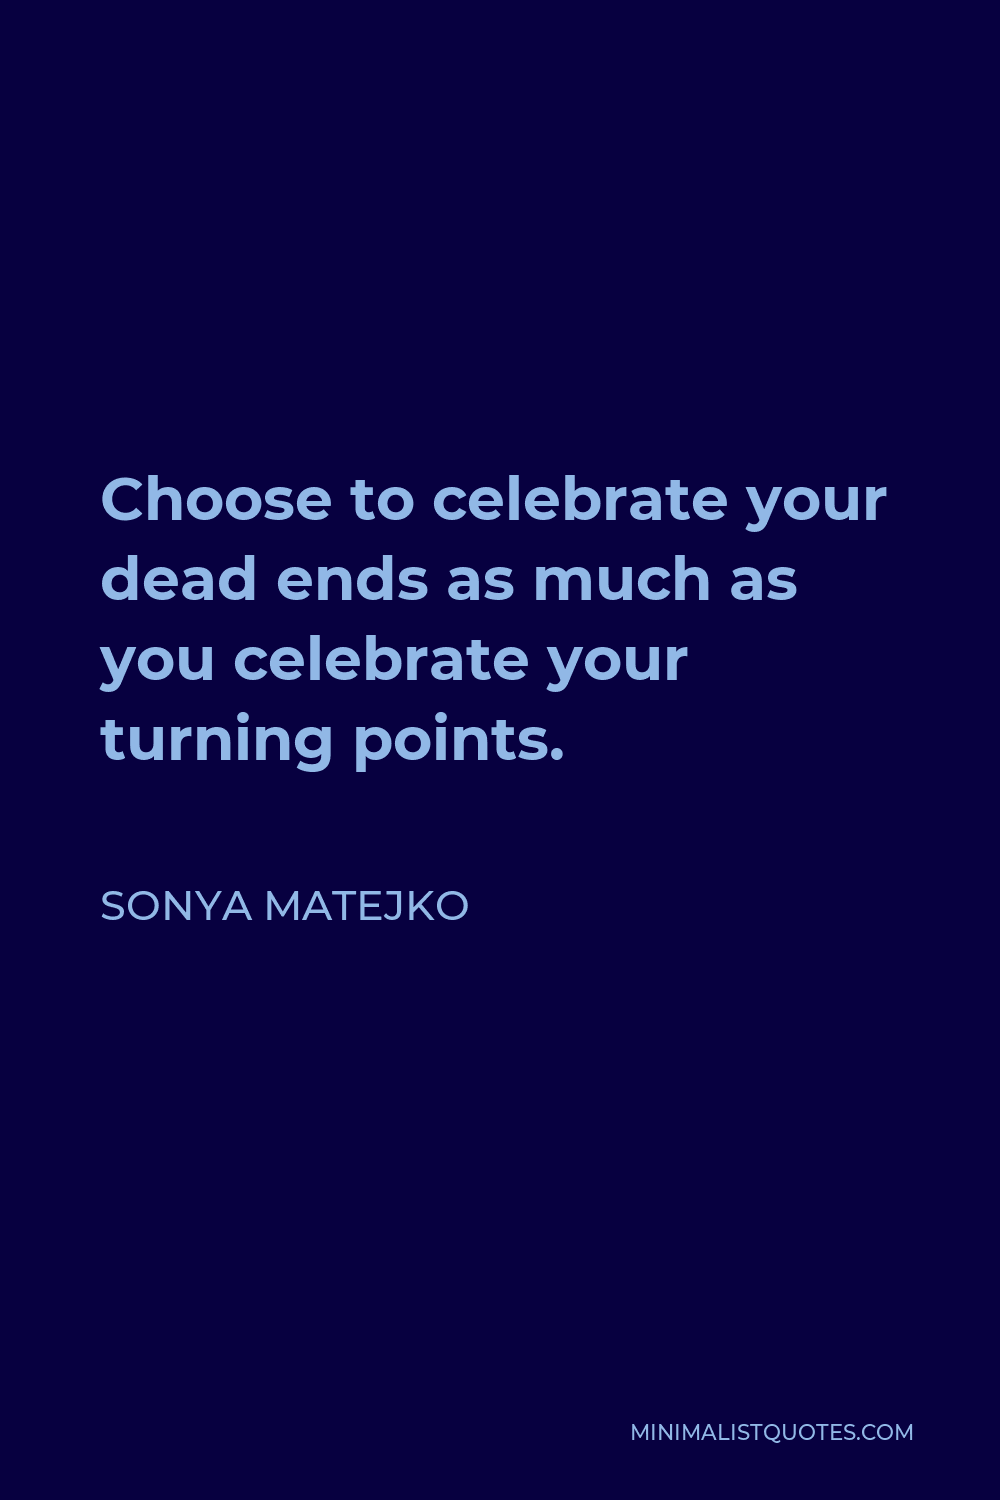 Sonya Matejko Quote - Choose to celebrate your dead ends as much as you celebrate your turning points.